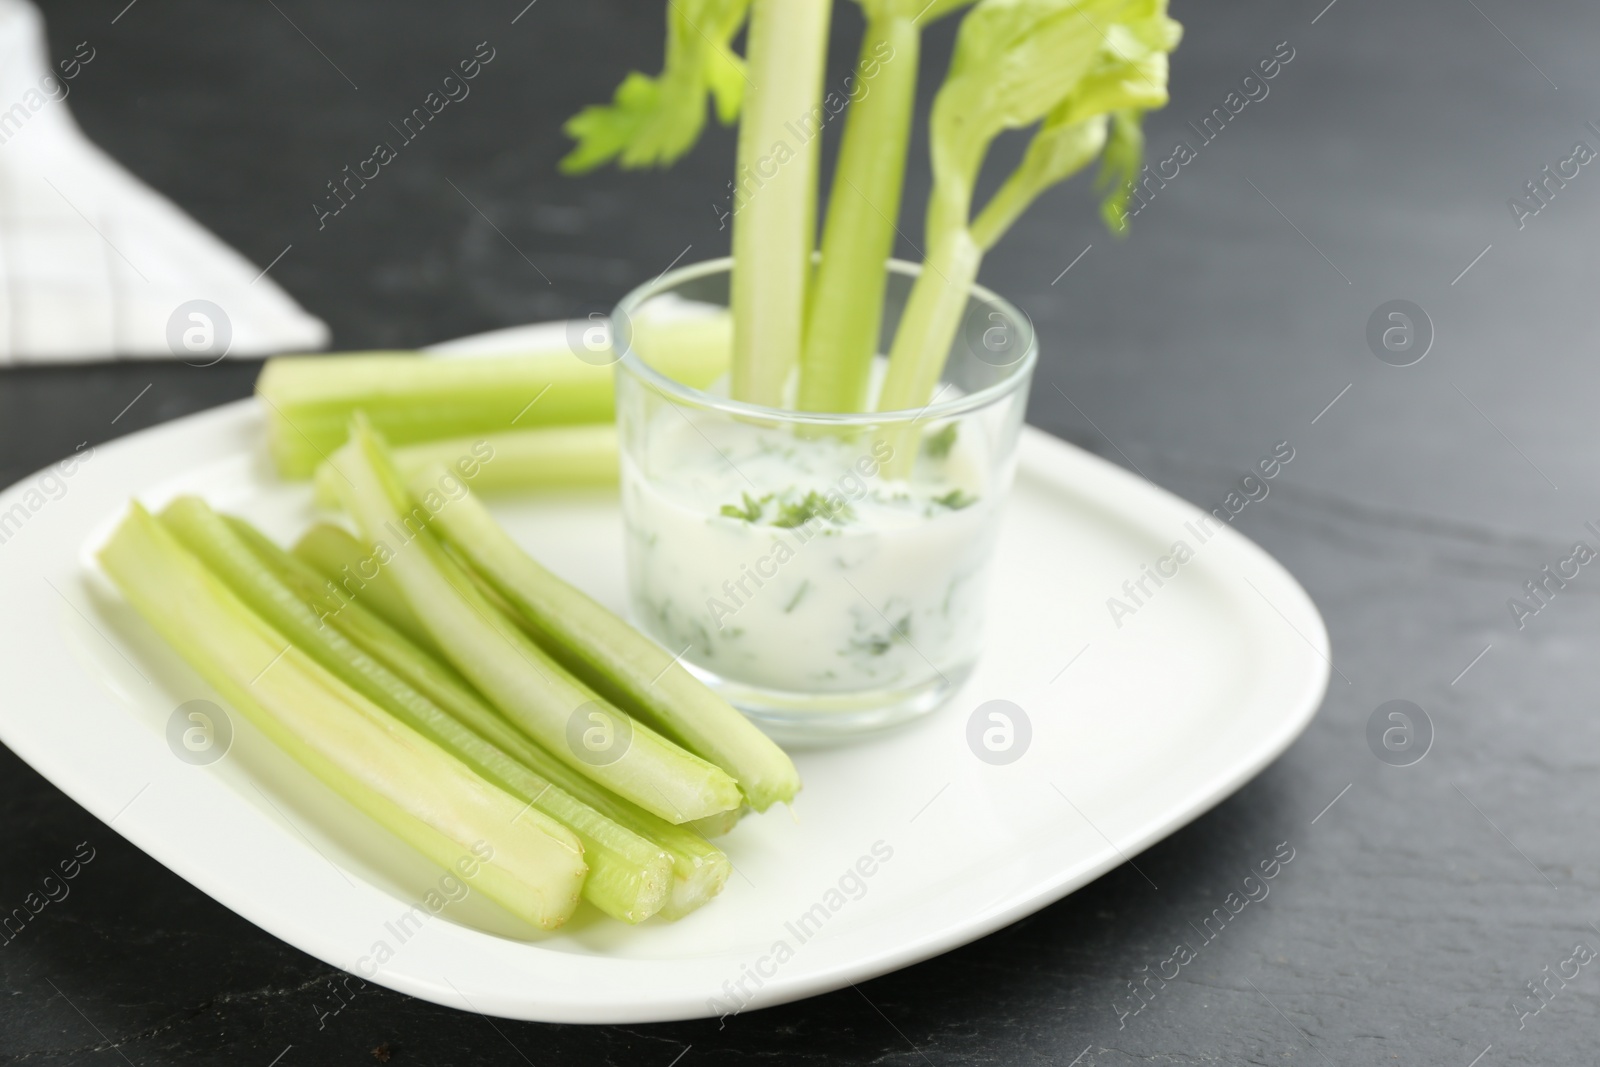 Photo of Celery sticks with dip sauce in glass on black table, closeup